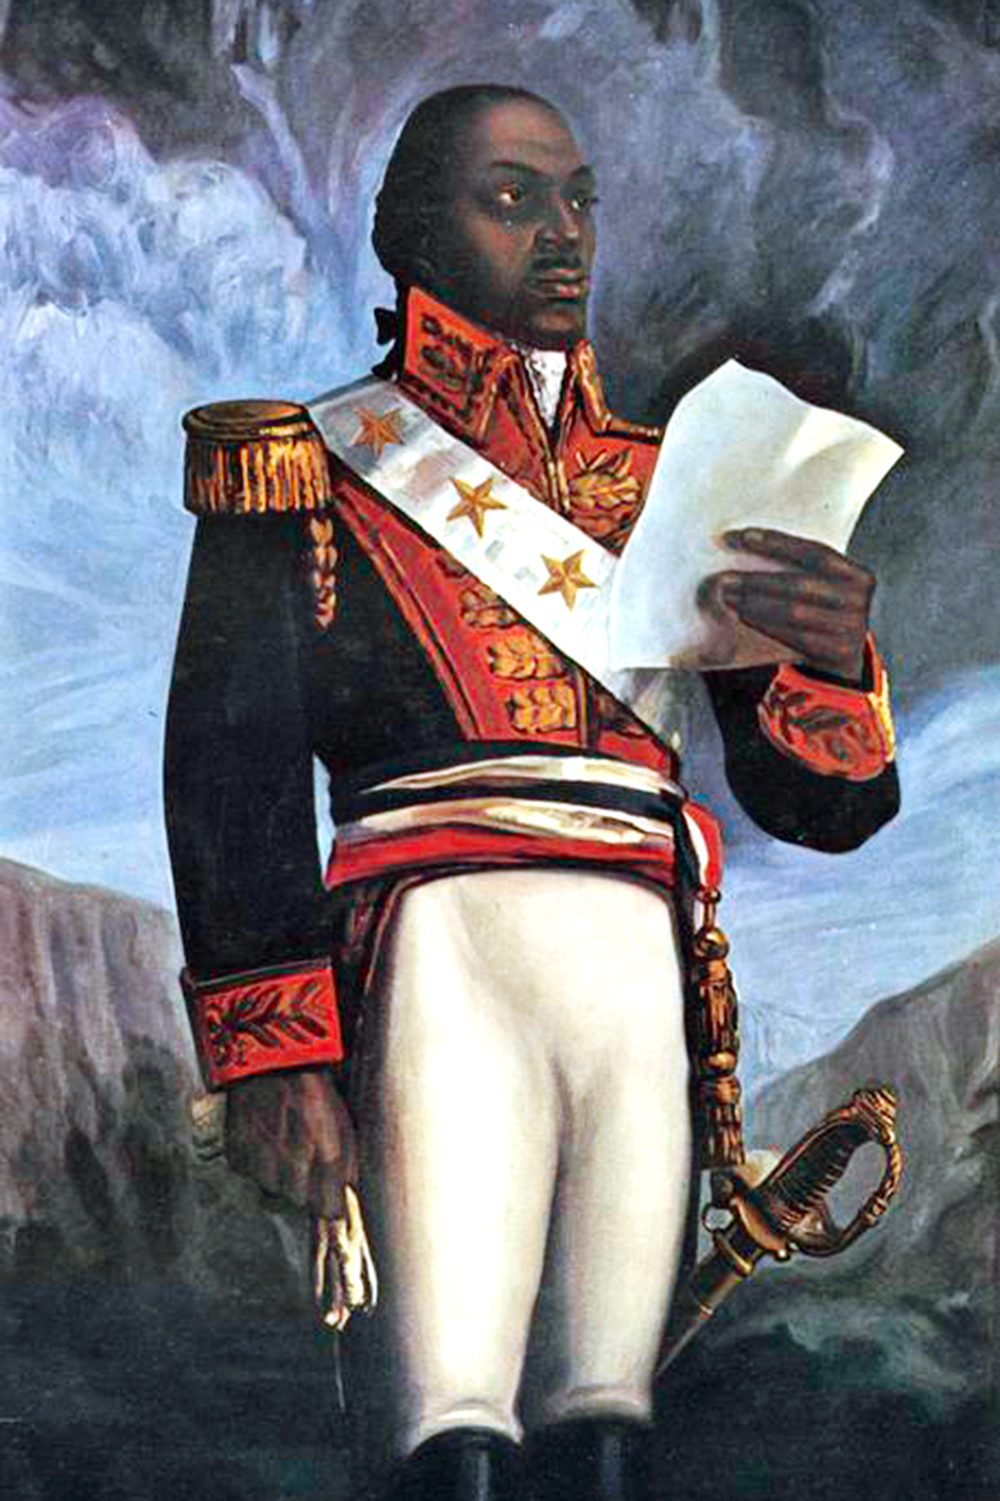 A portrait of Toussaint Louverture. He is wearing a french military uniform and a sash with three large stars on it. He has a sword hanging from his side. He is holding up a piece of paper in his left hand and white gloves in his right hand. The backdrop is a stormy sky and mountains.